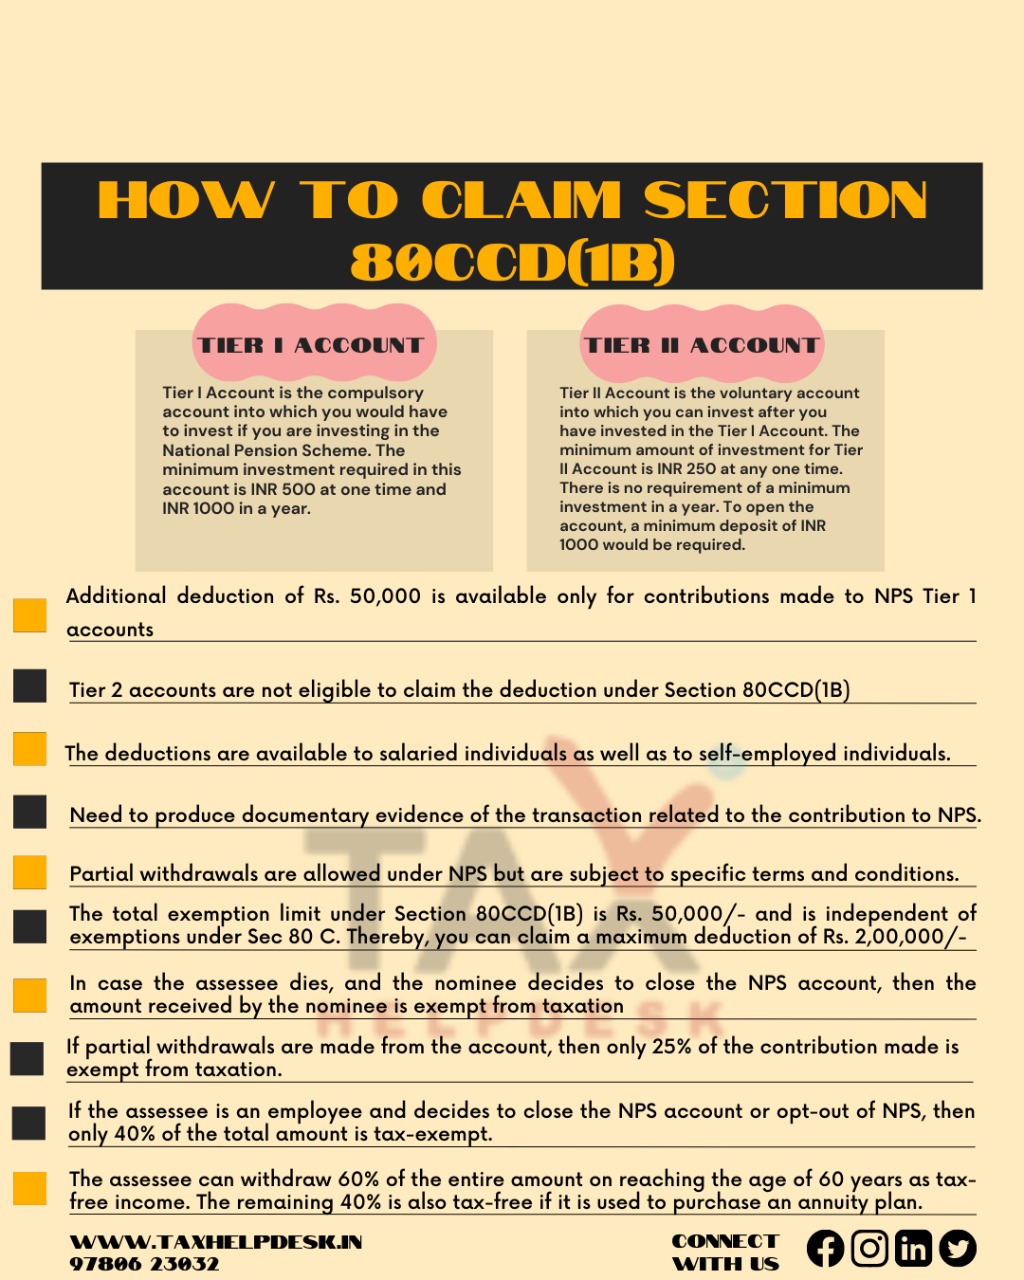 how-to-claim-section-80ccd-1b-taxhelpdesk